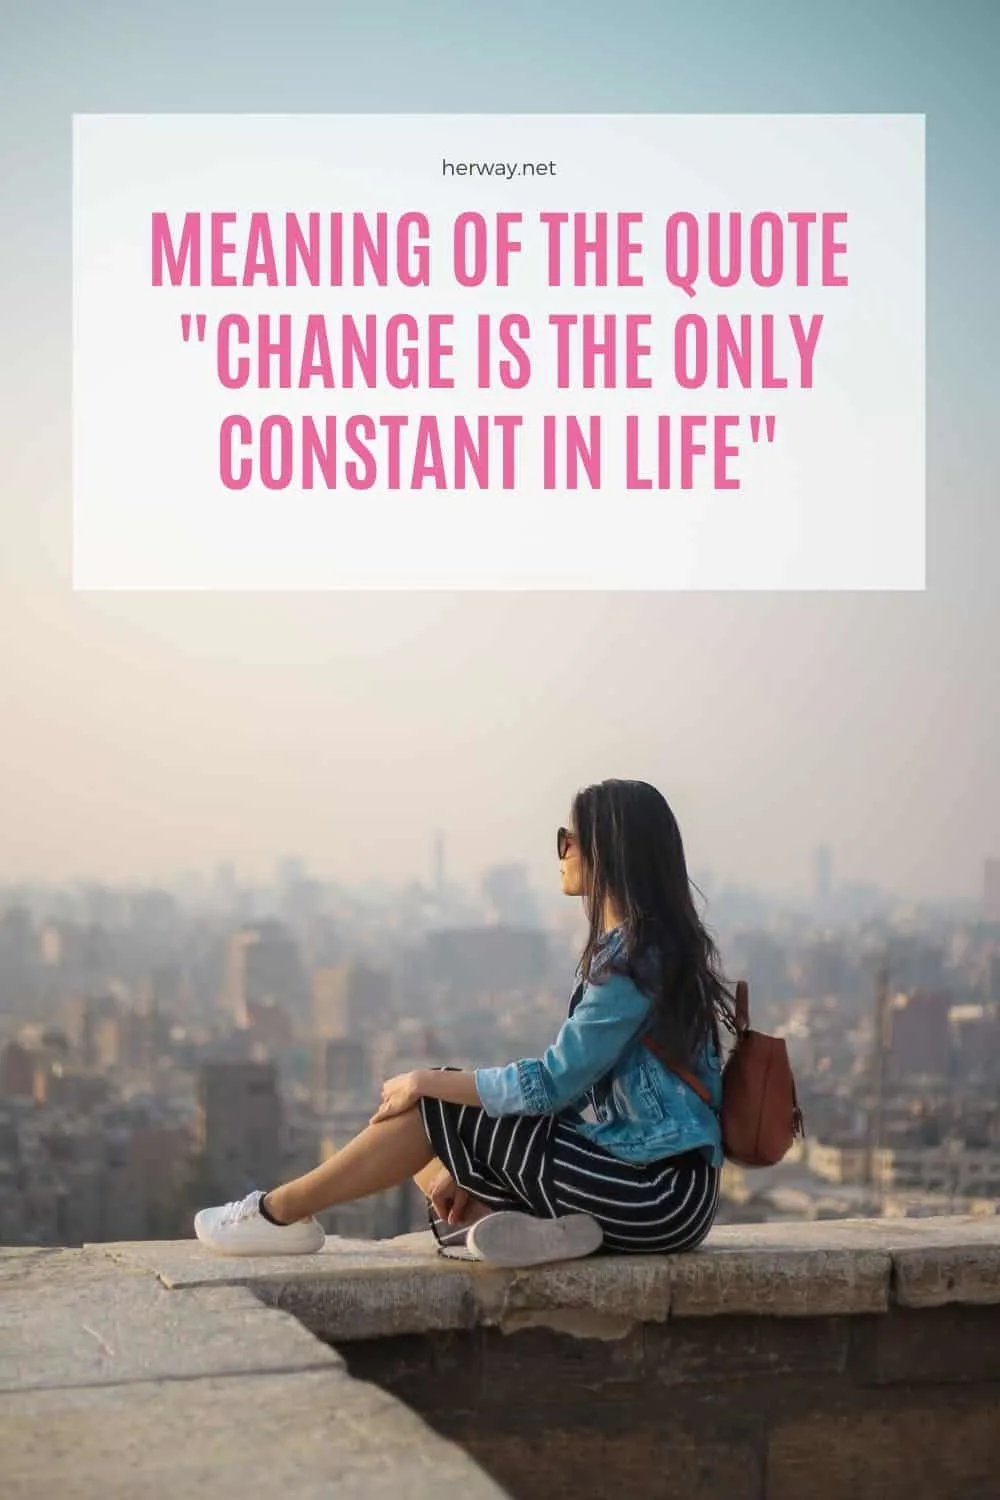 Meaning Of The Quote "Change Is The Only Constant In Life"